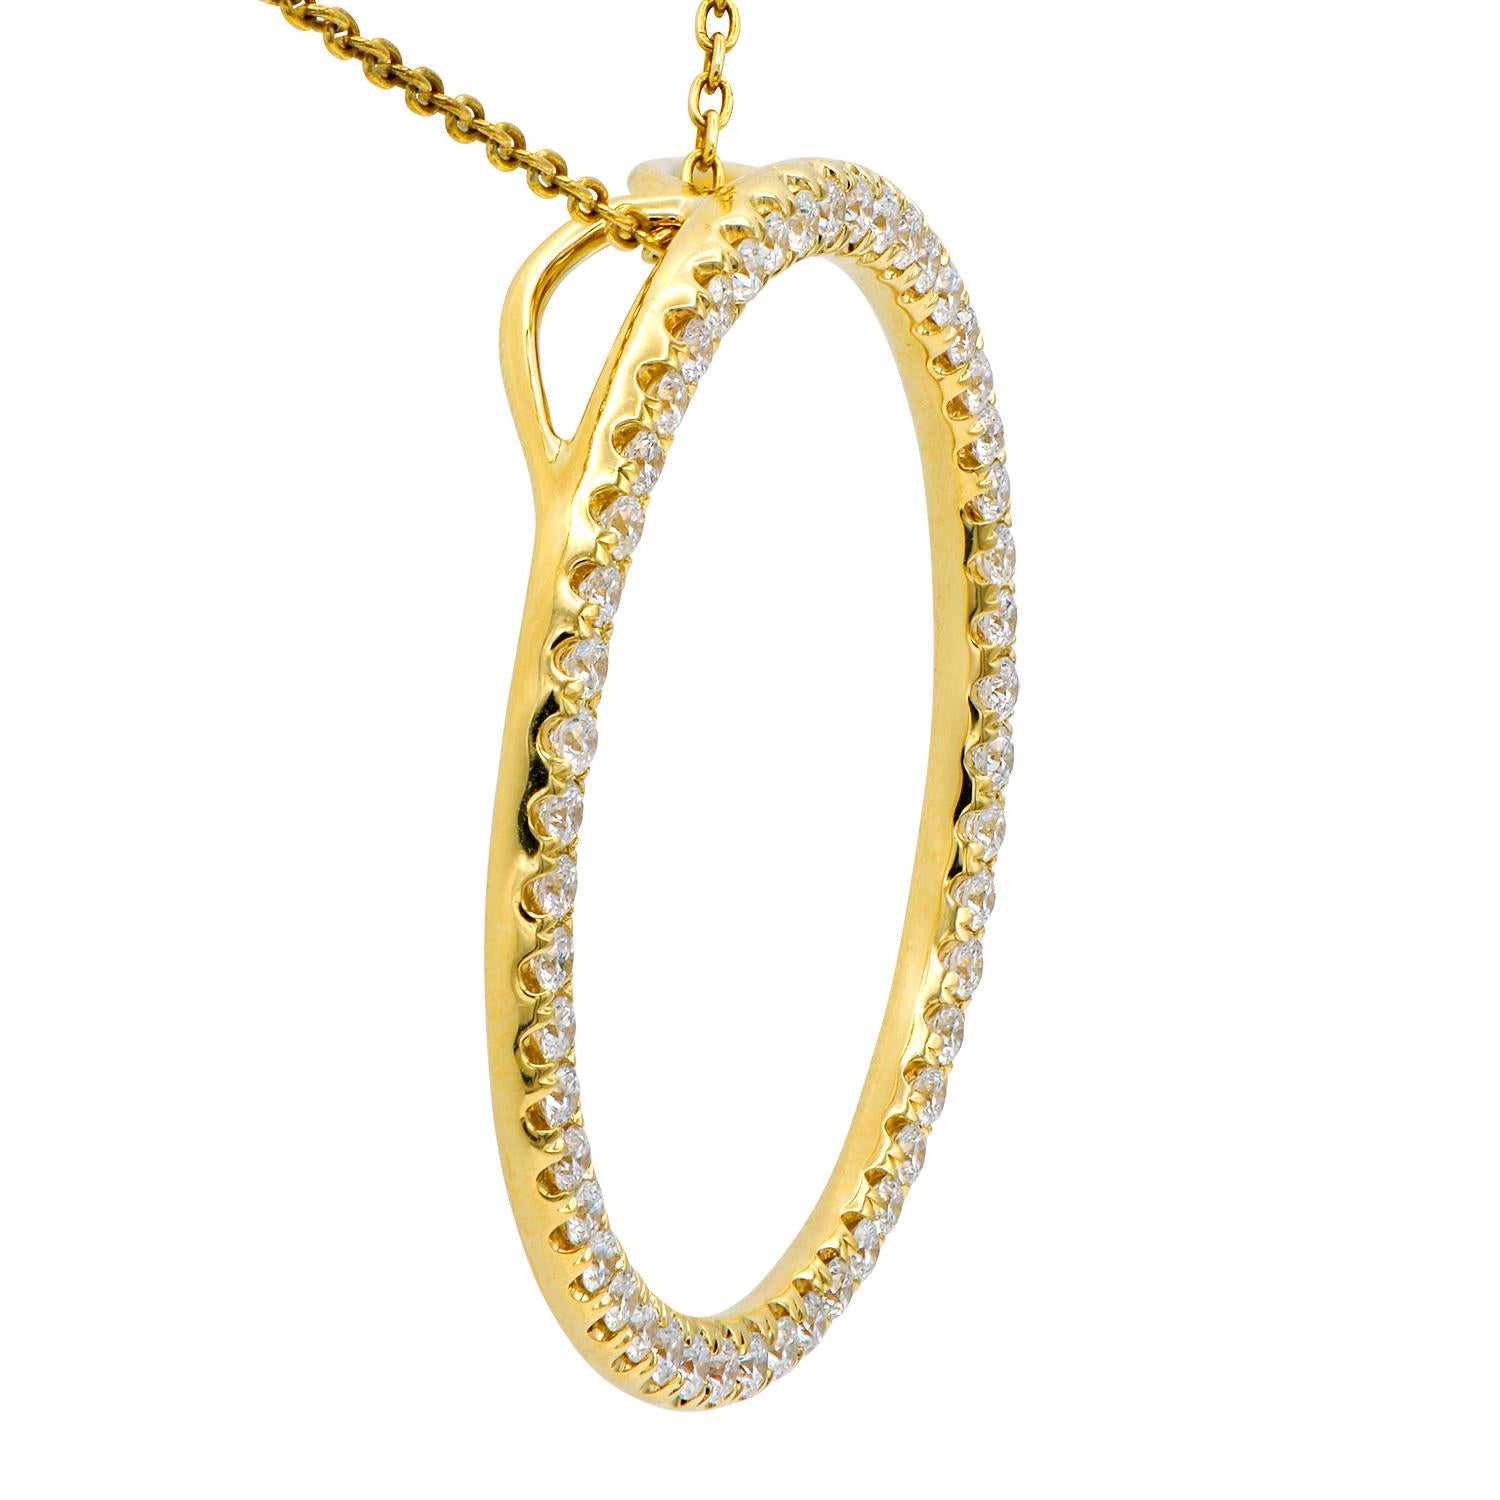 A perfect circle of beautiful sparkling diamonds is the perfect accessory for any occasion. This stunning pendant is made from 4.4 grams of 18 karat yellow gold which is covered in 50 round VS2, G color diamonds totaling 0.84 carats, Included is an